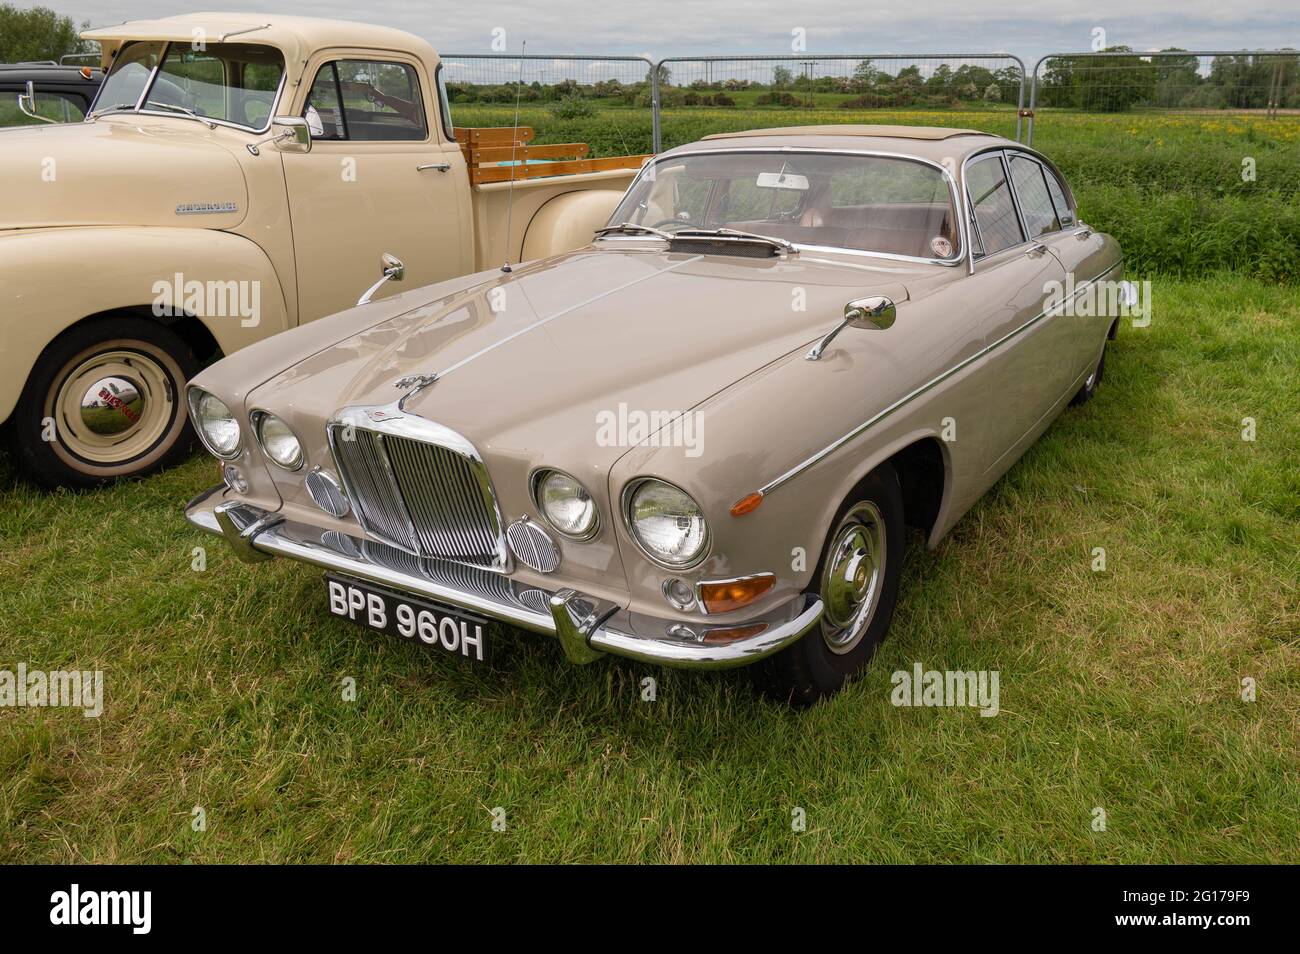 An old Jaguar mark 10 in lovley condition at a classic car show Stock Photo